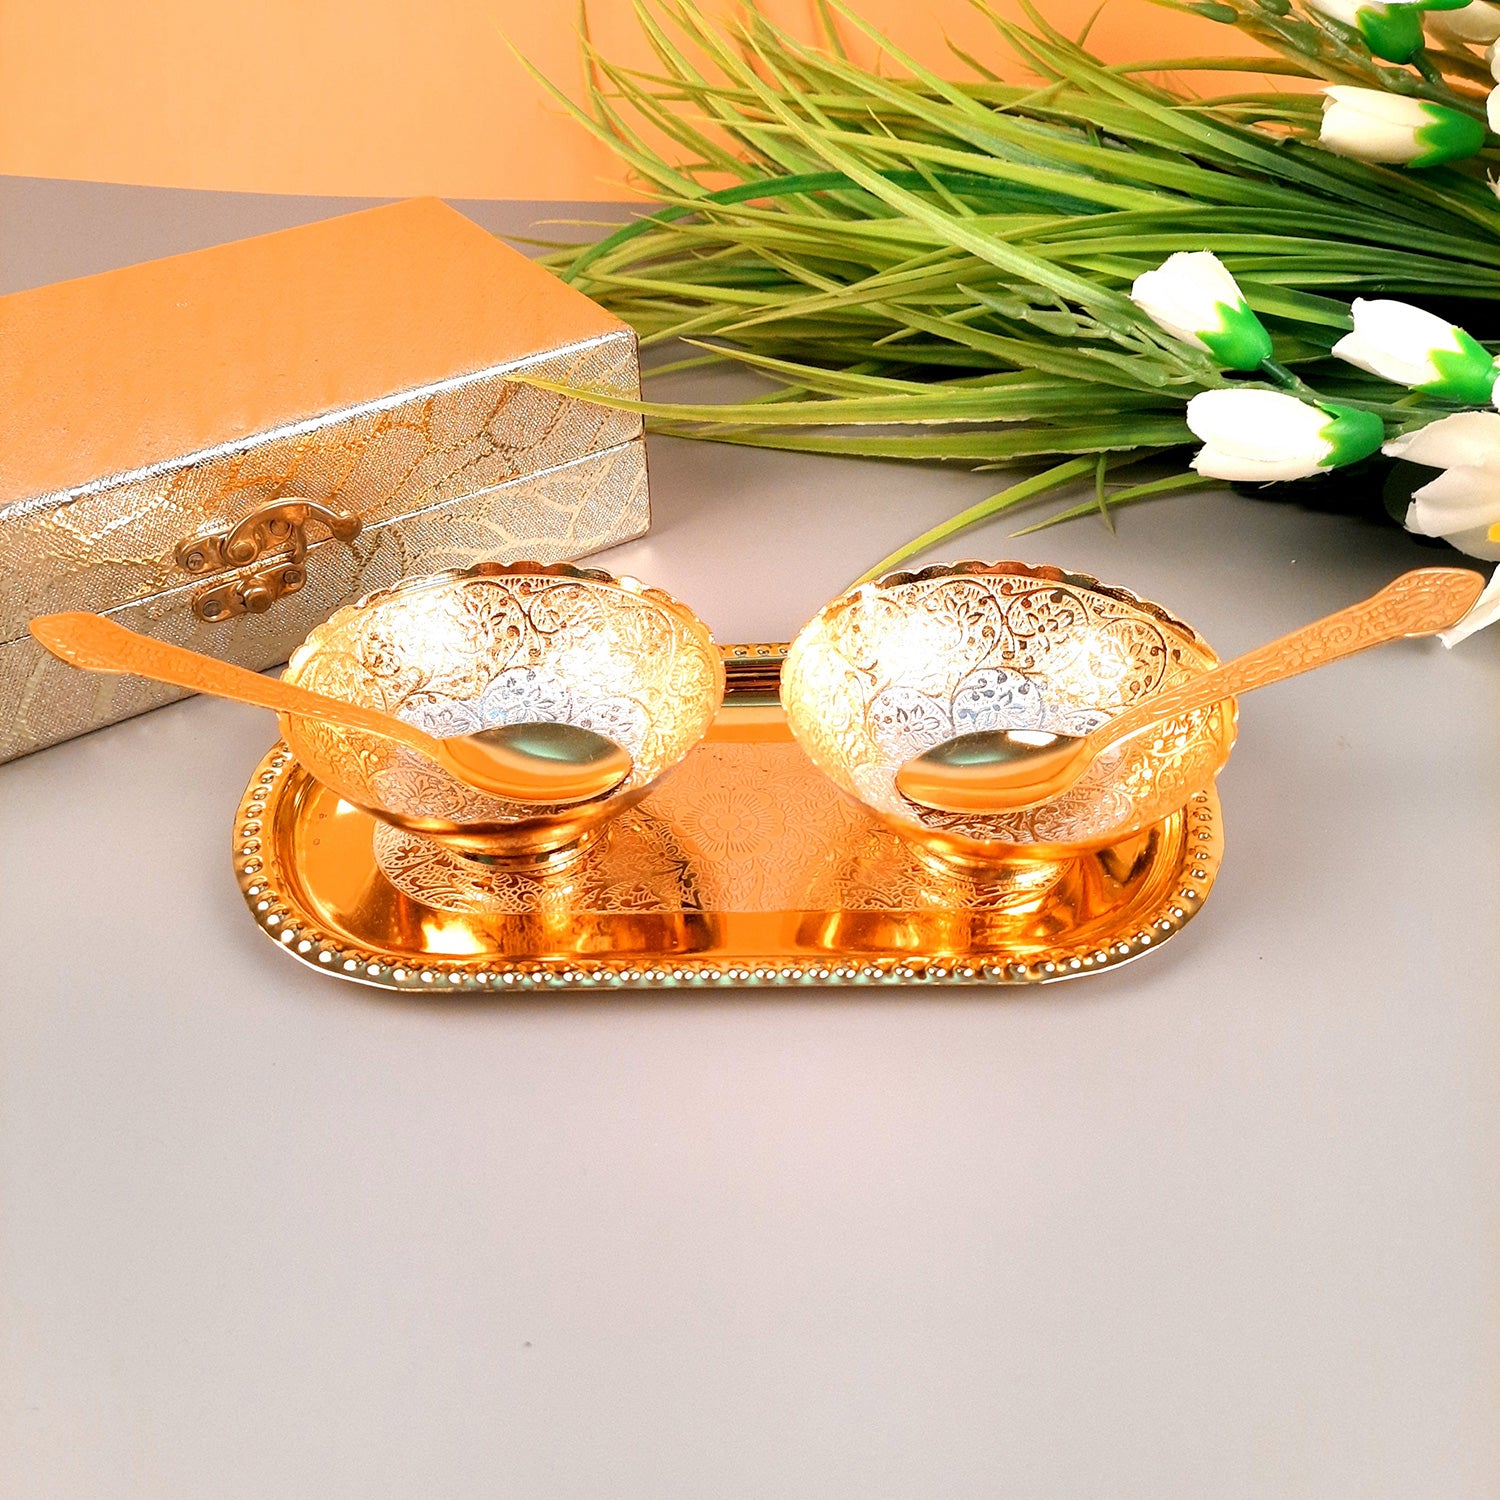 Dessert Bowls With Tray, Spoon & Gift Box | Dry Fruit / Mukhwas Serving Tray With Bowl - For Dining Table, Home & Kitchen Decor | Wedding, Housewarming & Diwal Gift Set - Apkamart